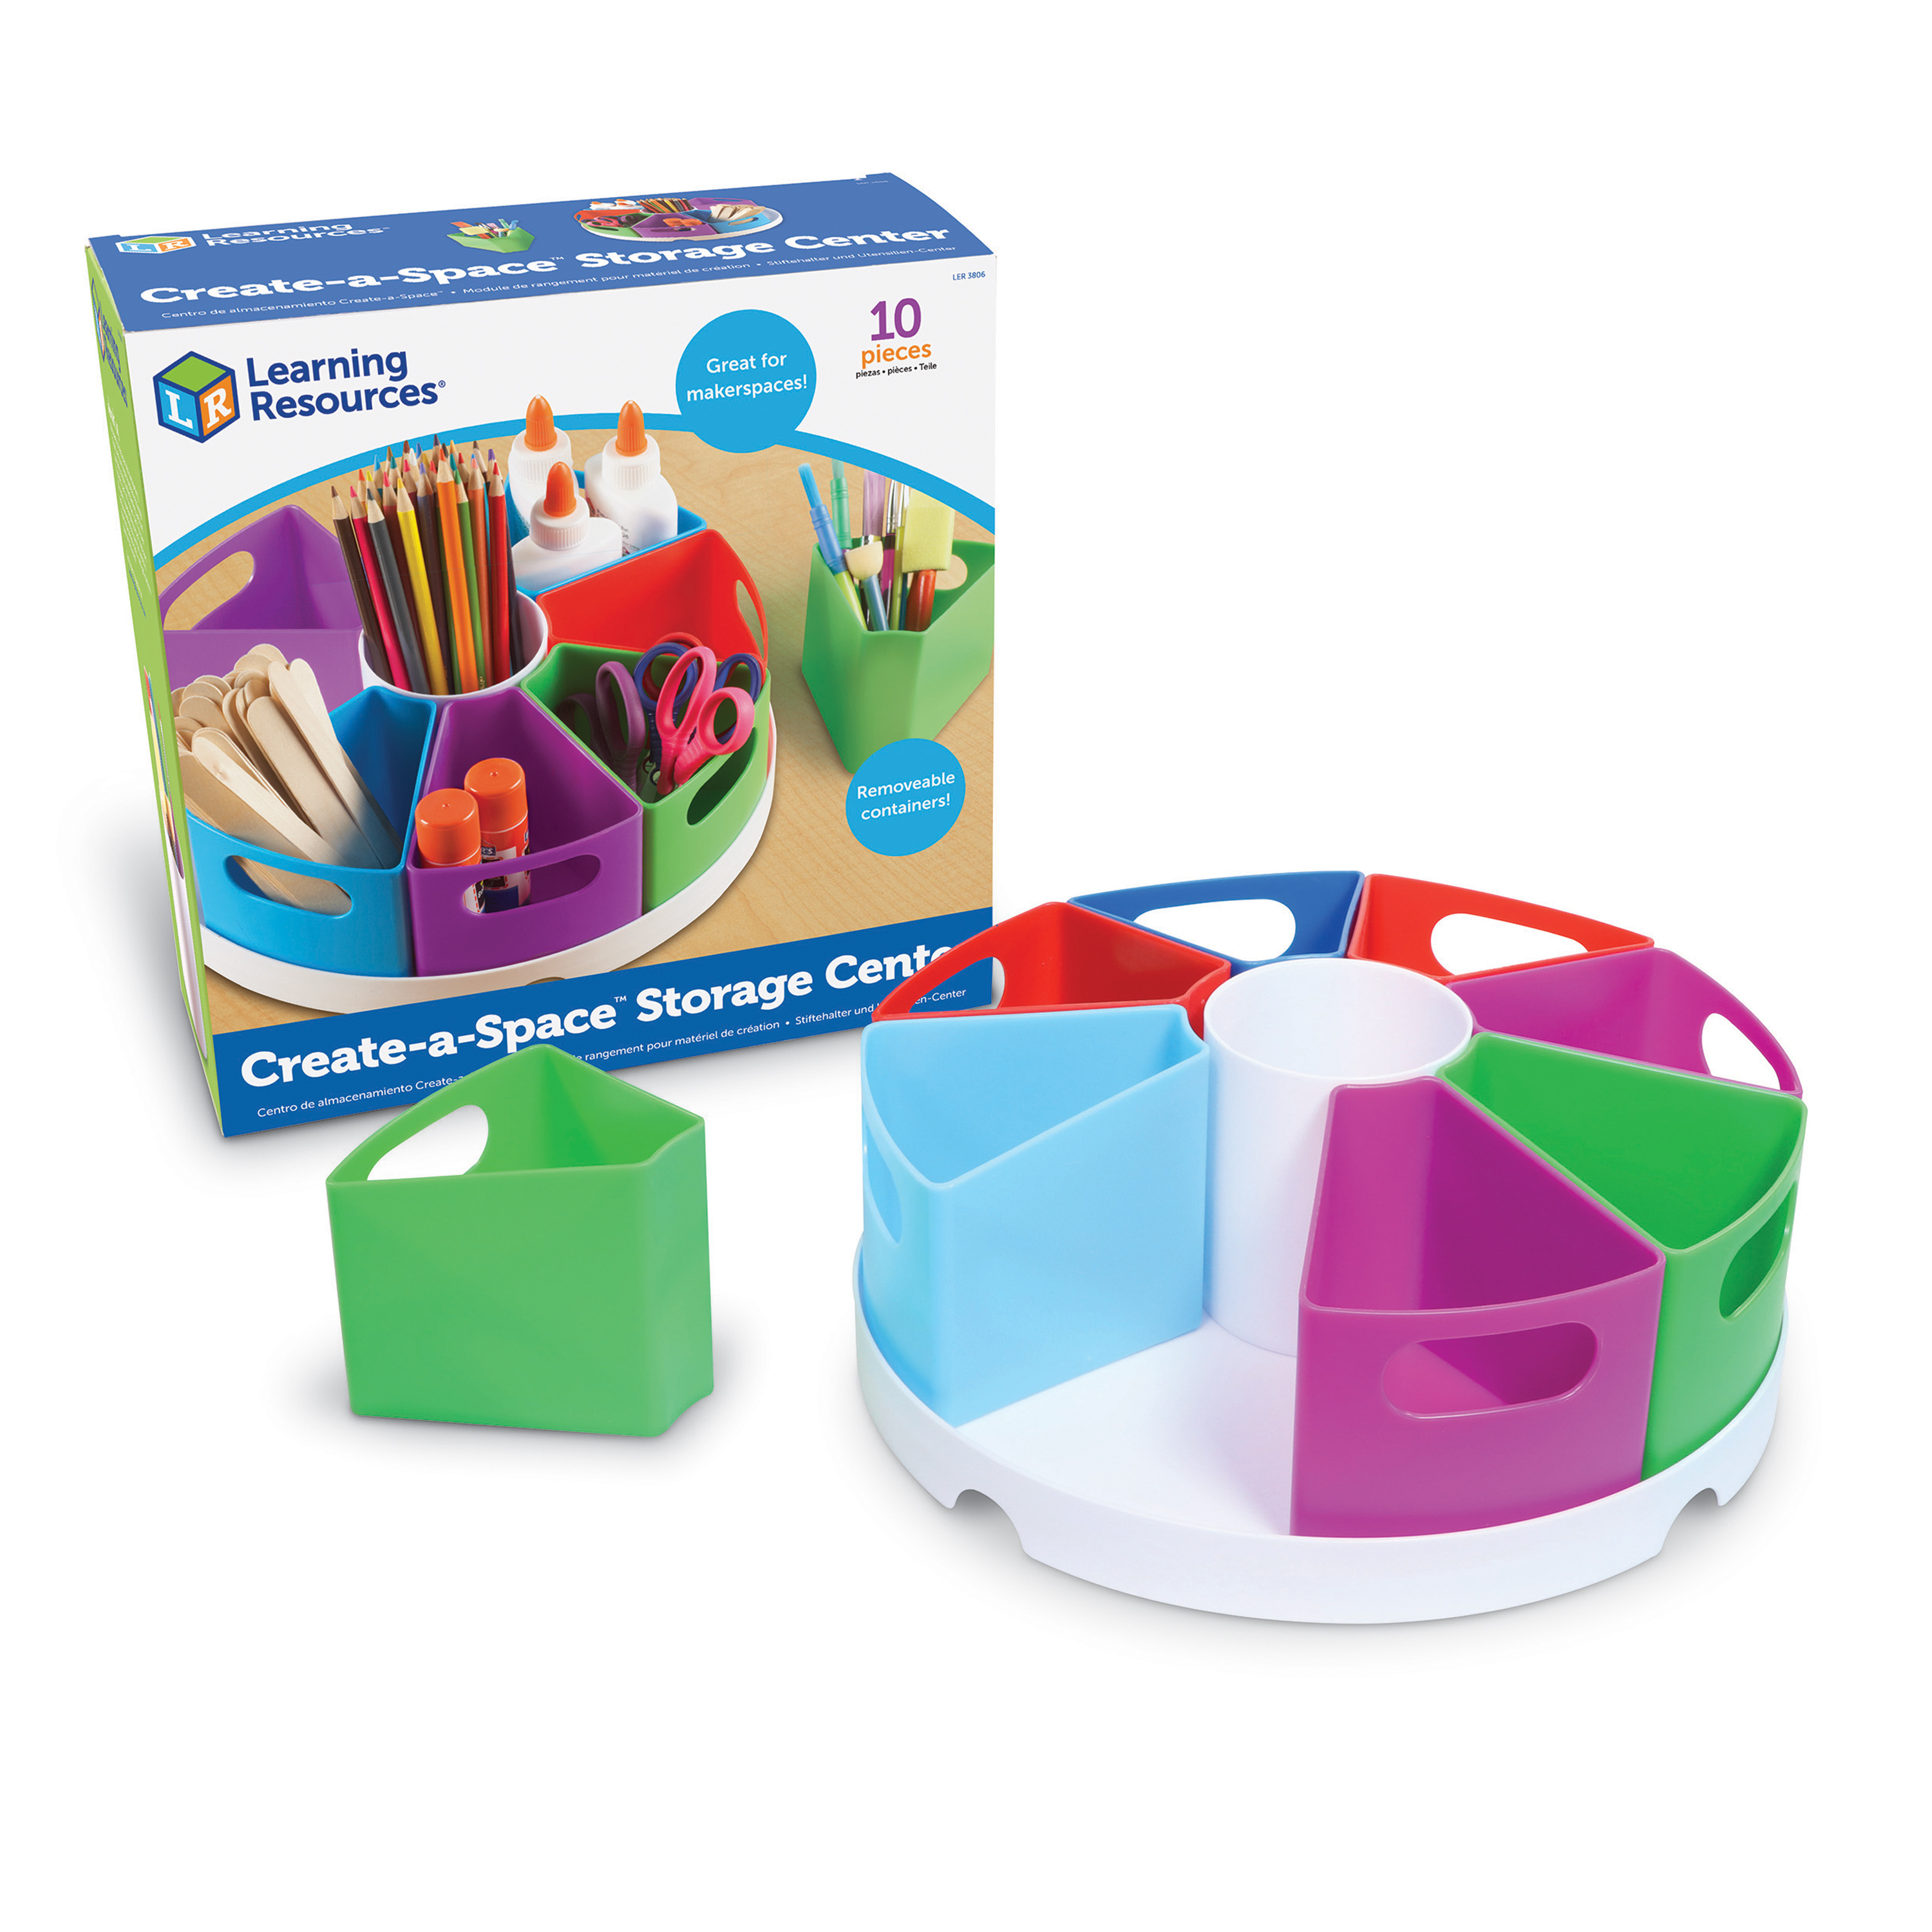 Resources:　10-Piece　Learning　School　Craft　and　Create-A-Space,　Craft　Classroom　Center,　Carousel　Storage　Boys　Supplies,　Girls,　and　Organizer